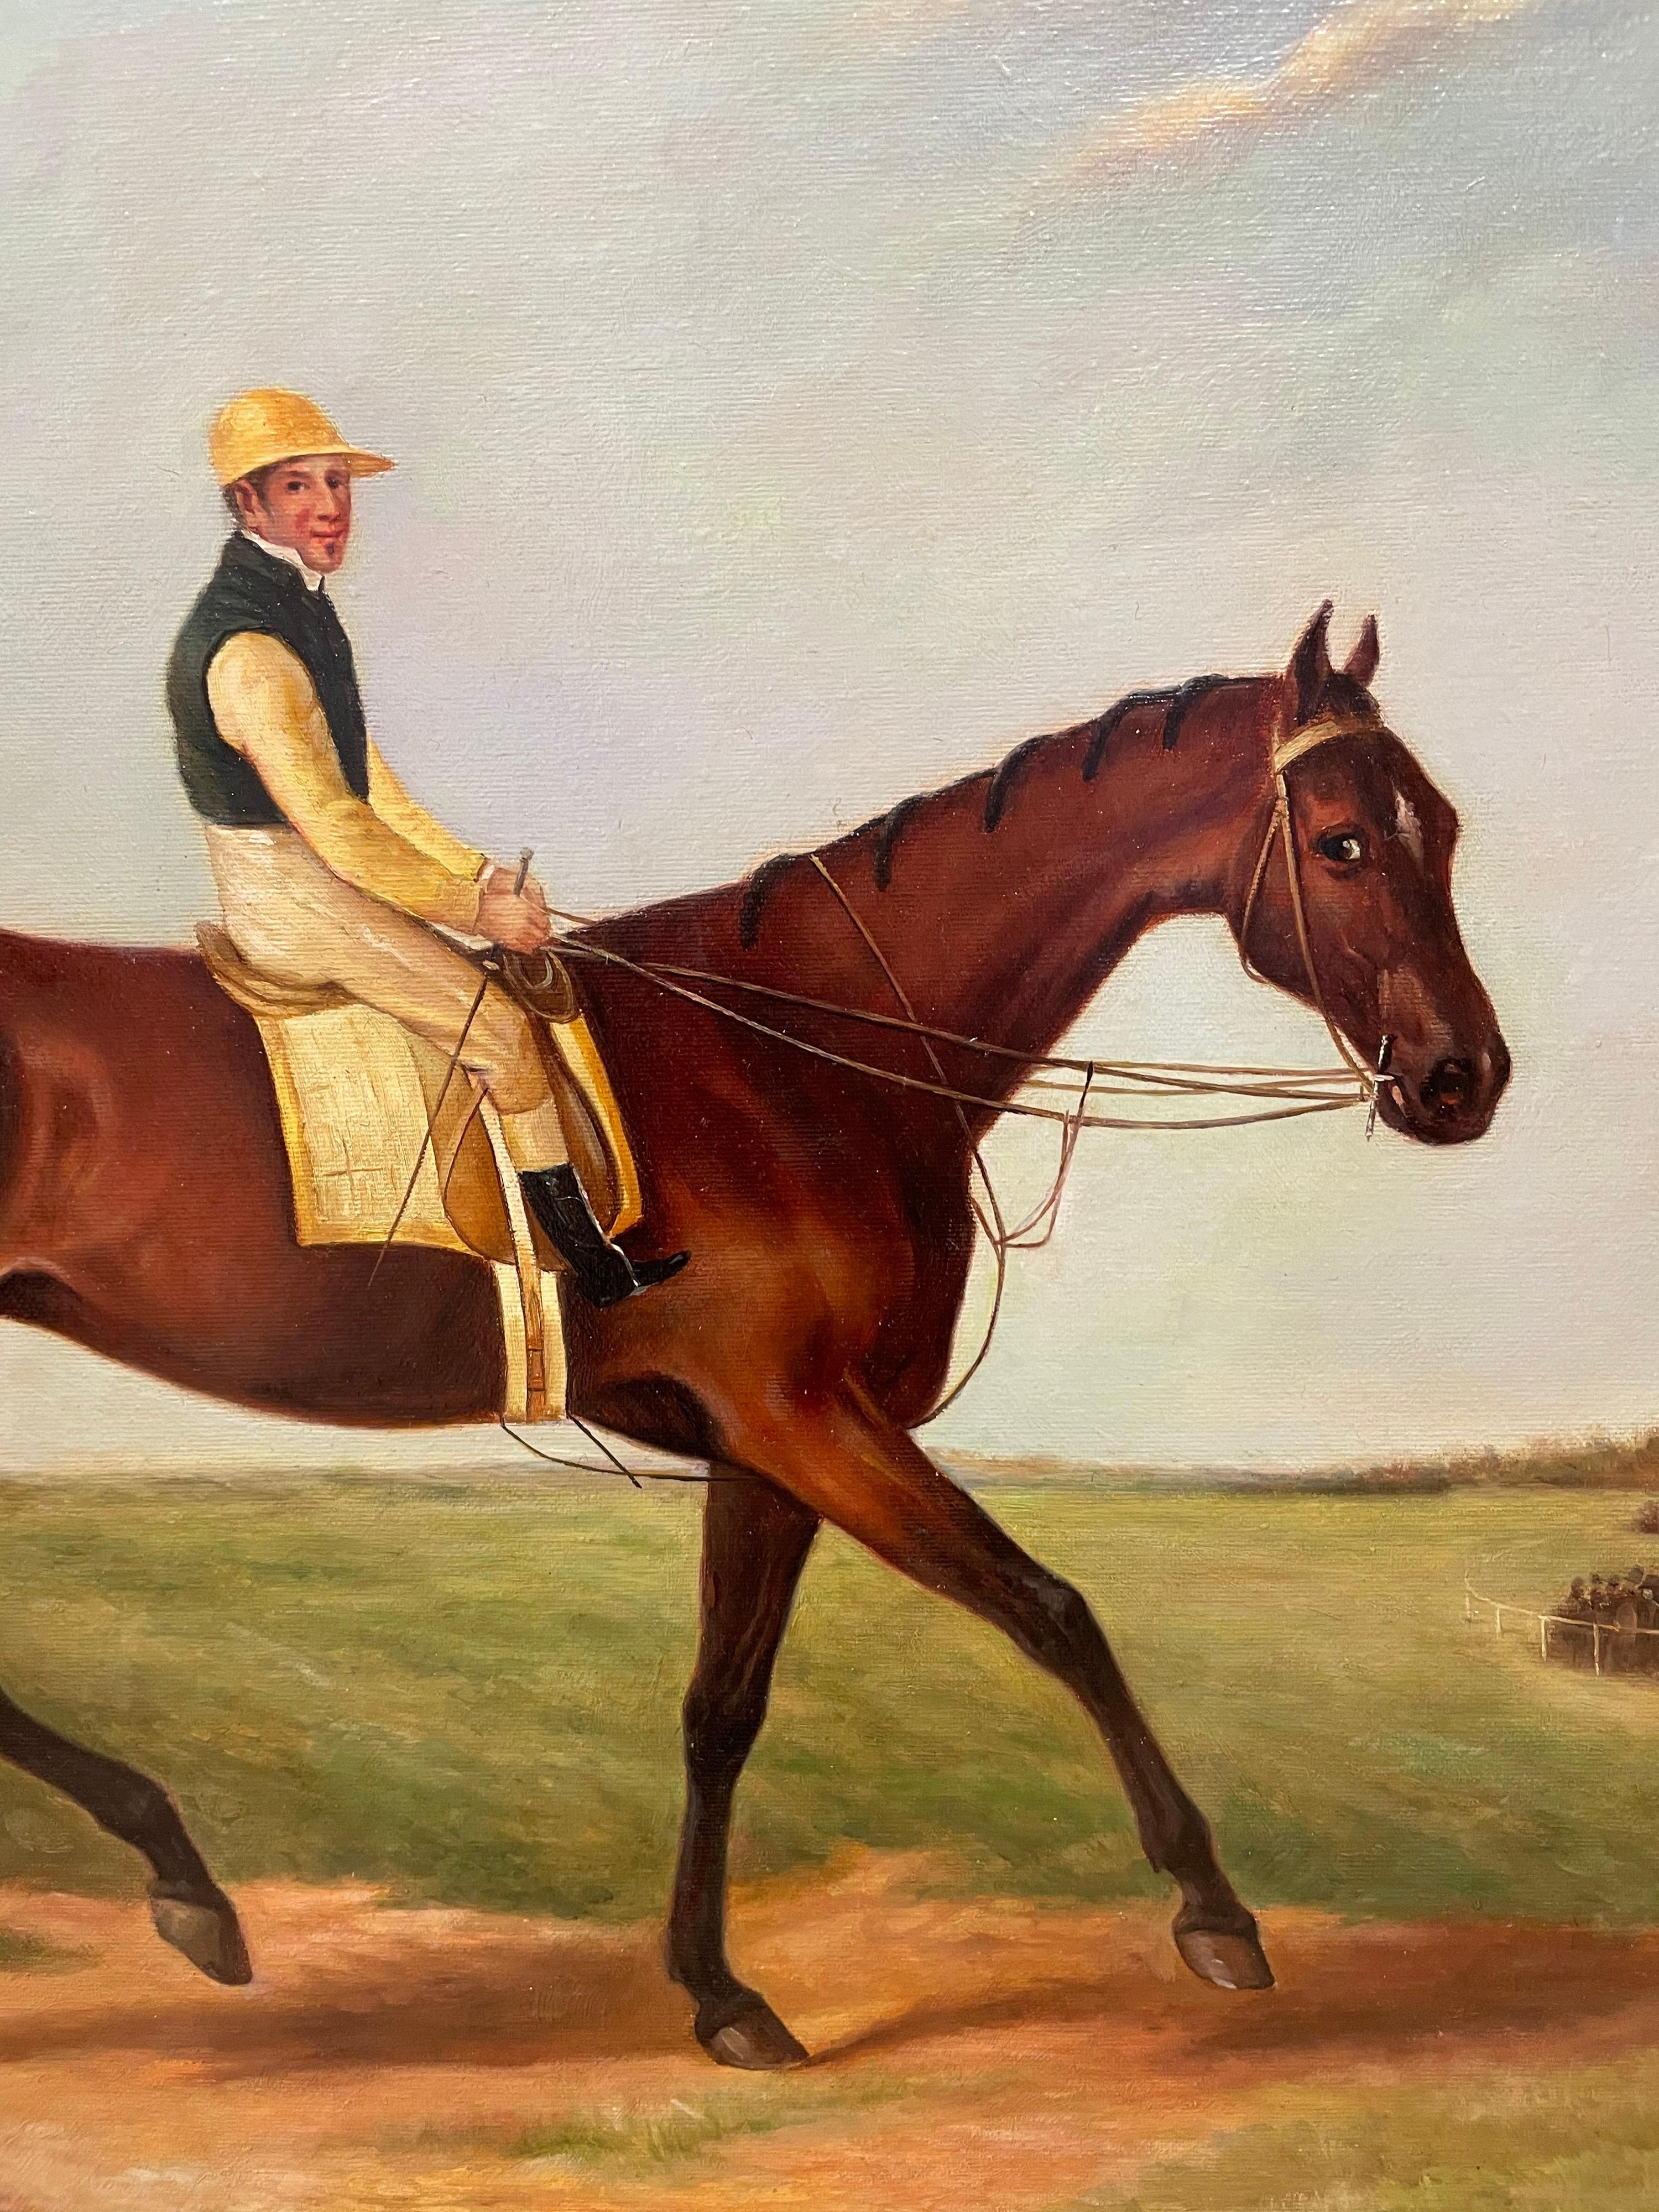 'Jockey & Trainer'
English School, 20th century
oil painting on canvas
canvas: 25 x 27 inches
framed: 30 x 32 inches
provenance: private collection, Dorset, England

condition: very good and ready to hang. 

A very fine example of British sporting